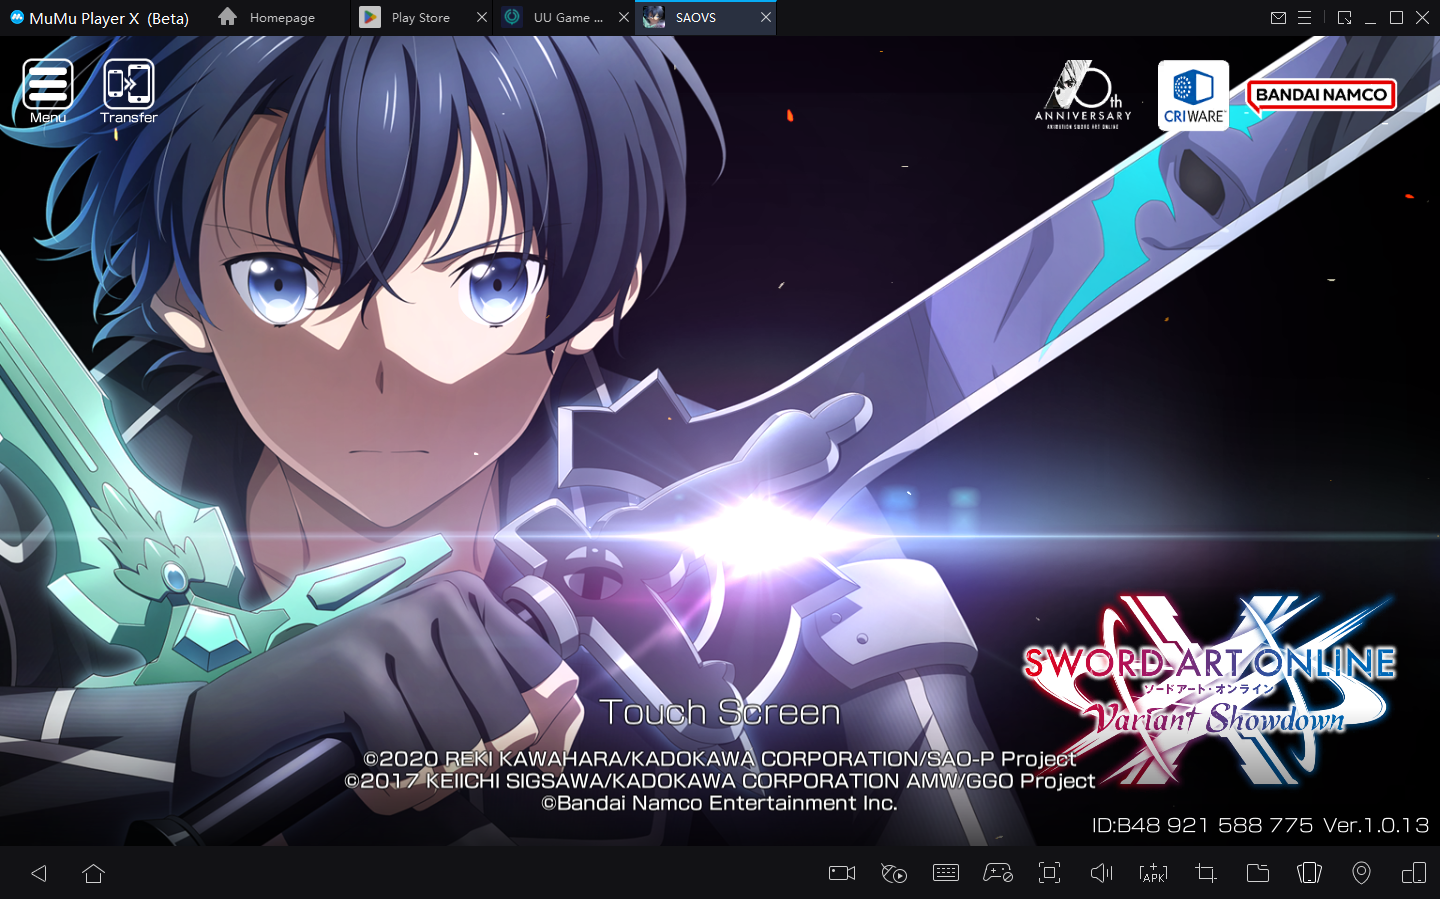 How to Play Sword Art Online VS on PC with MuMu Player X